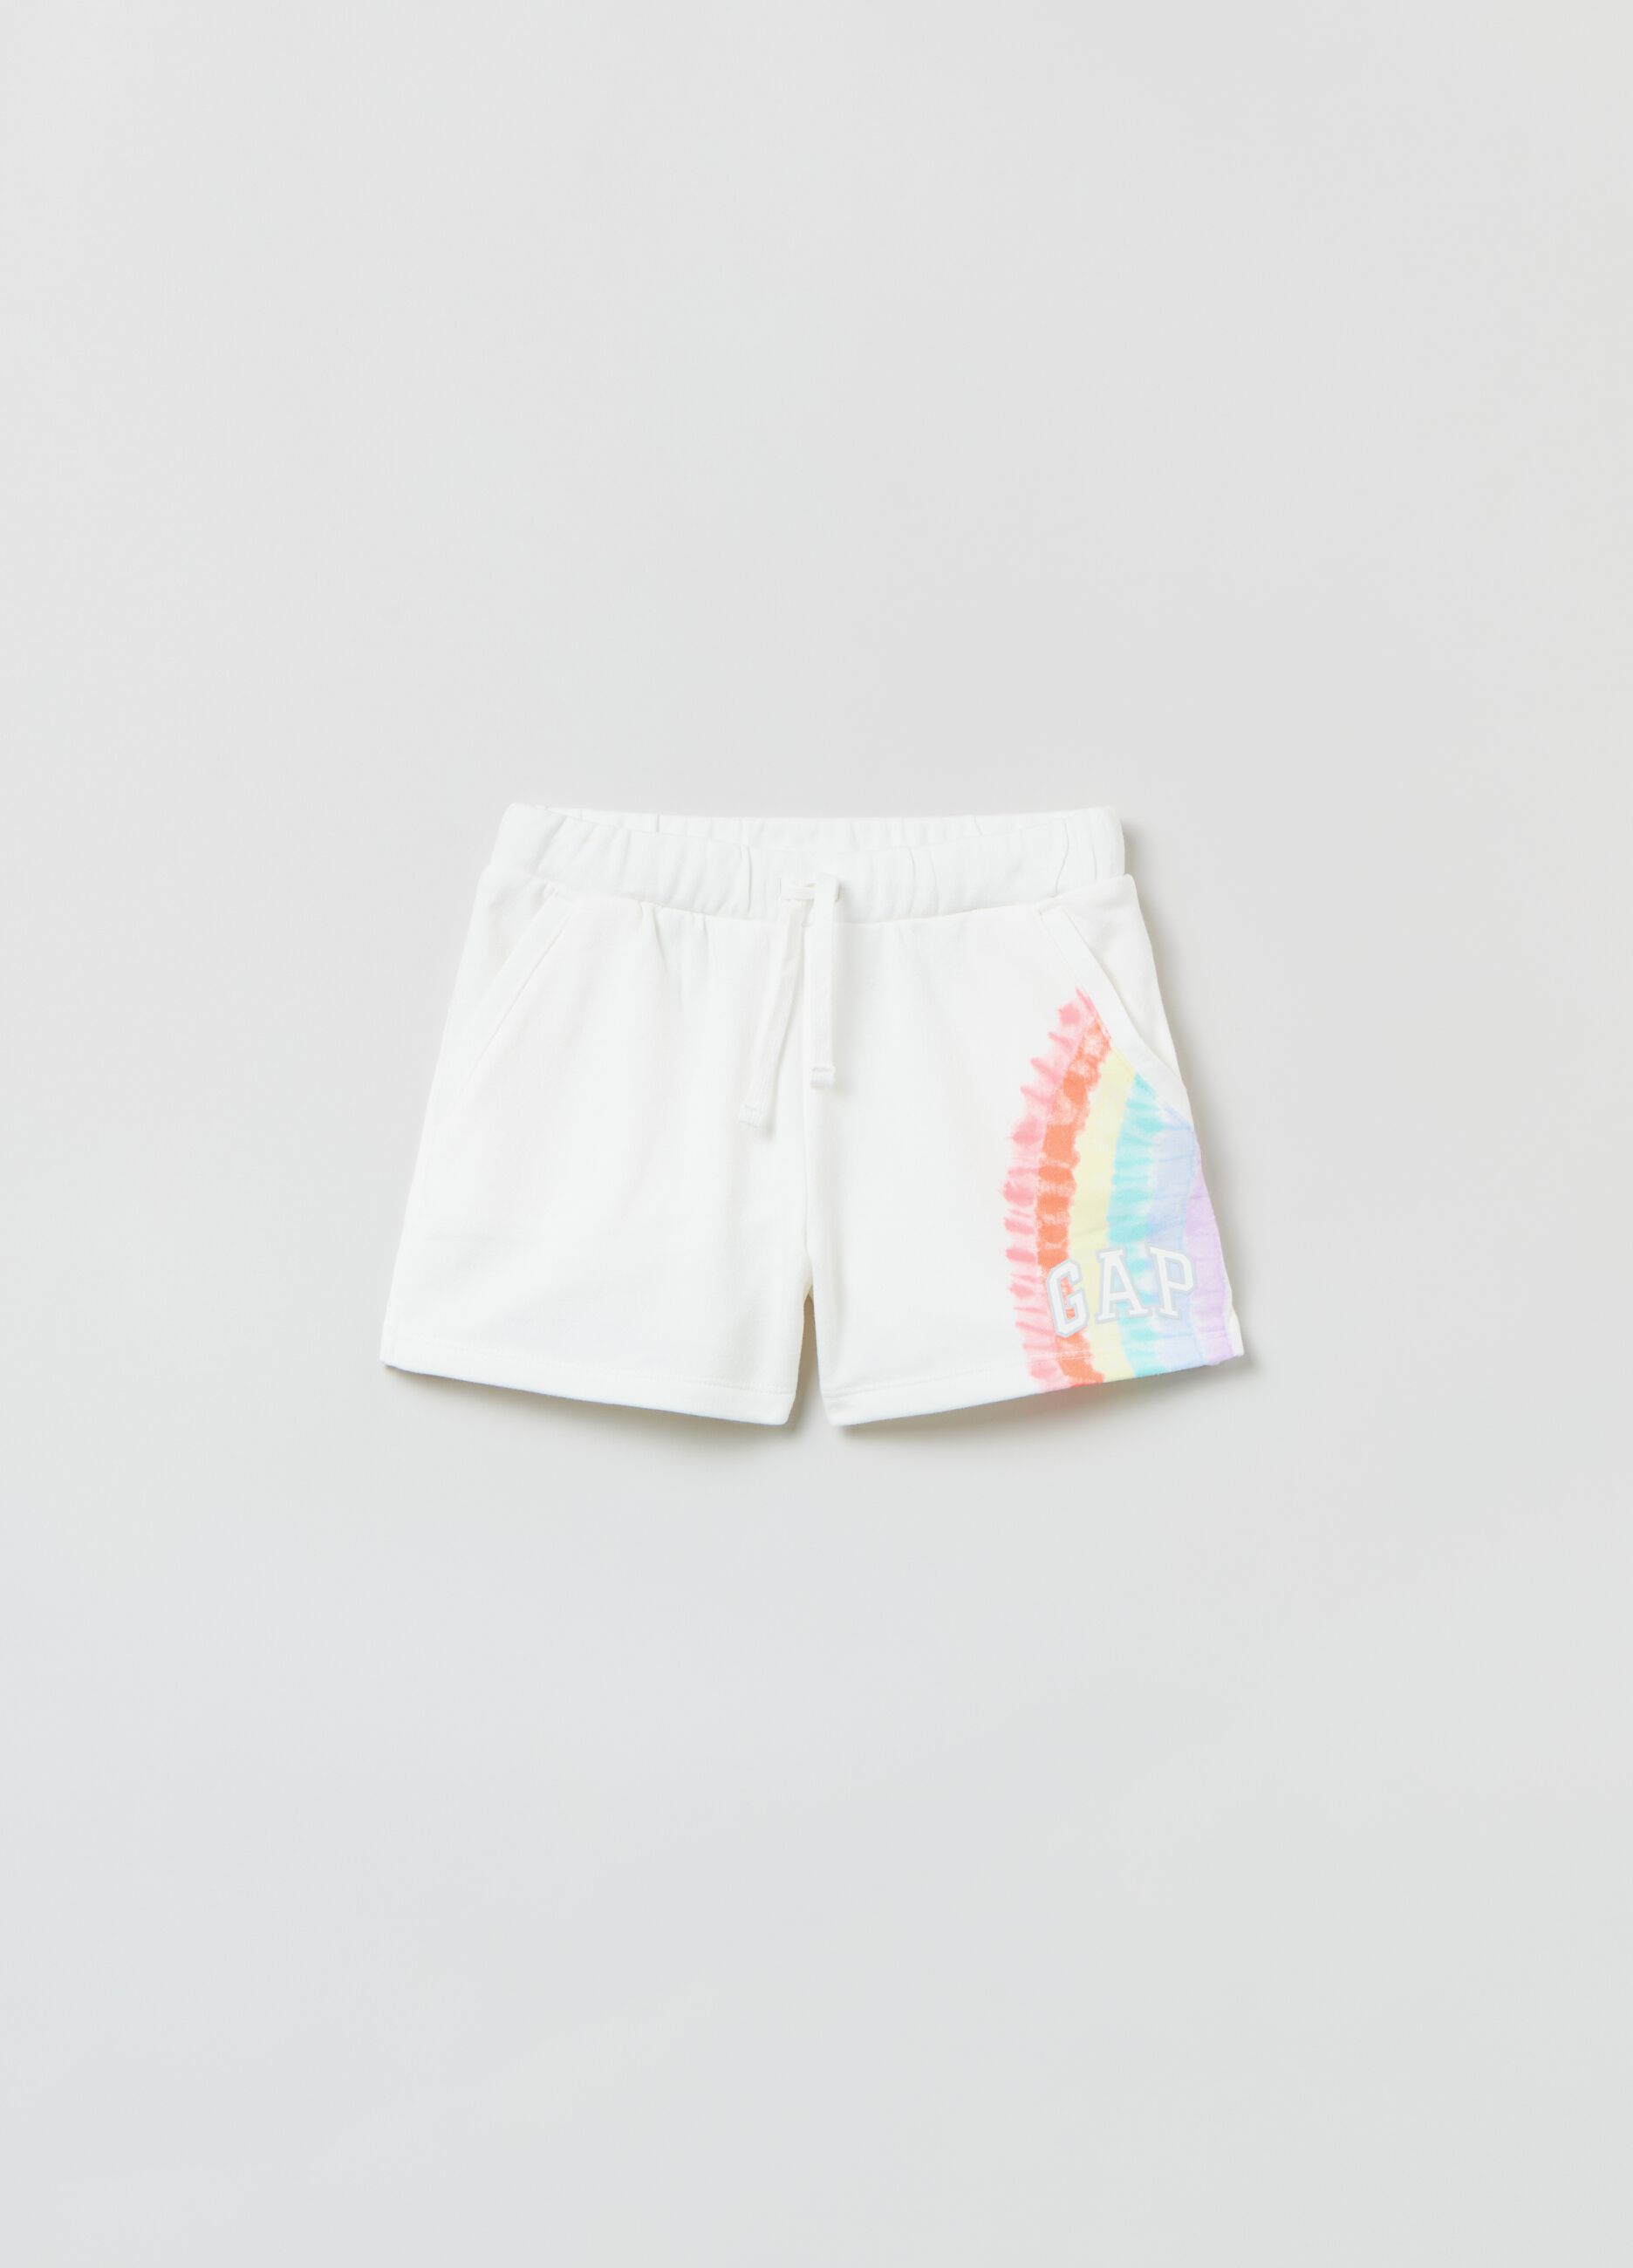 Shorts with Tie Dye print and logo